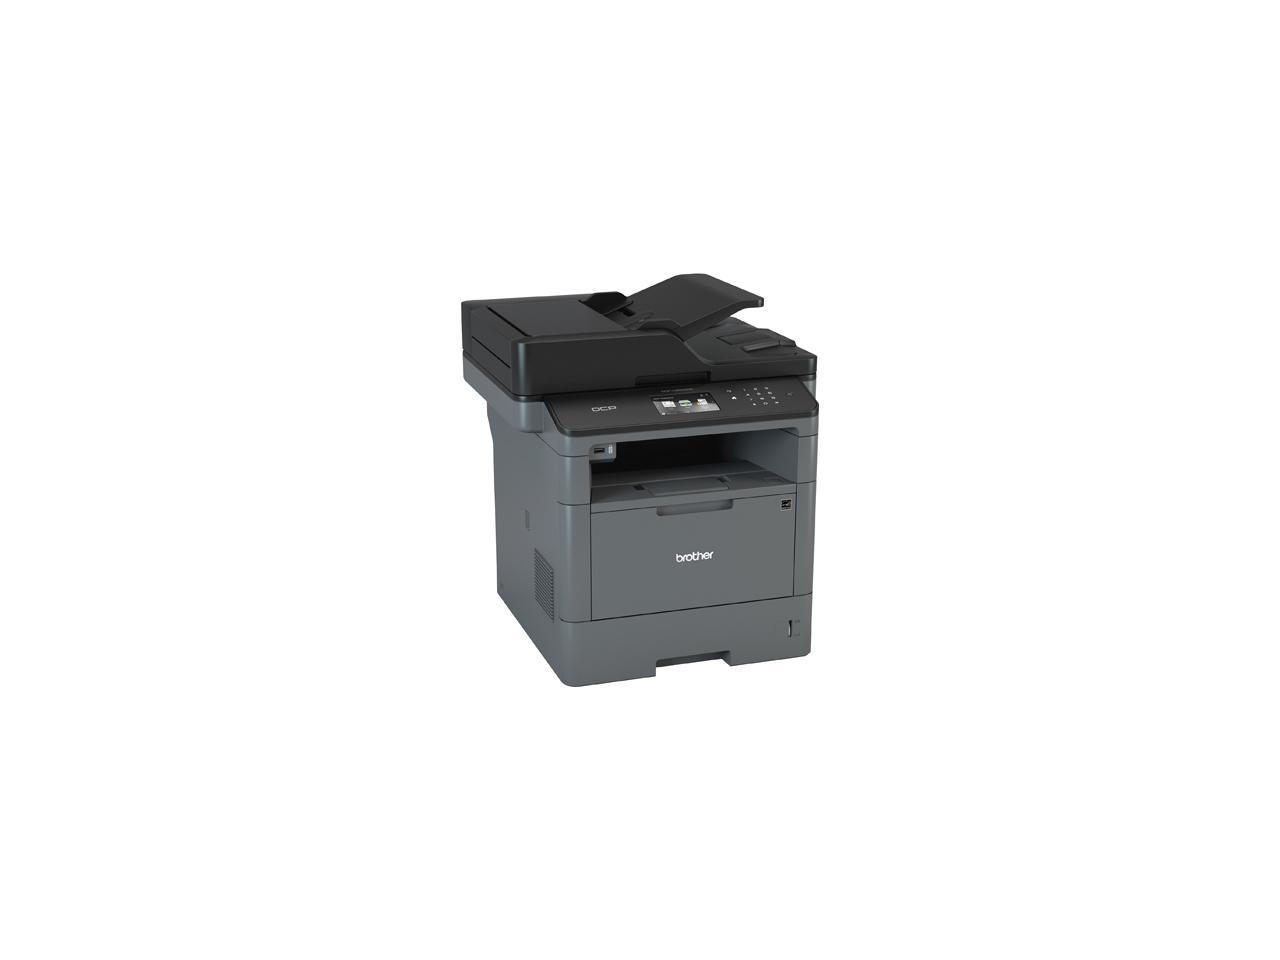 Brother DCP-L5500DN Laser Multifunction Copier and Printer, Flexible Connectivity, Duplex Mobile & Scanning - Newegg.com